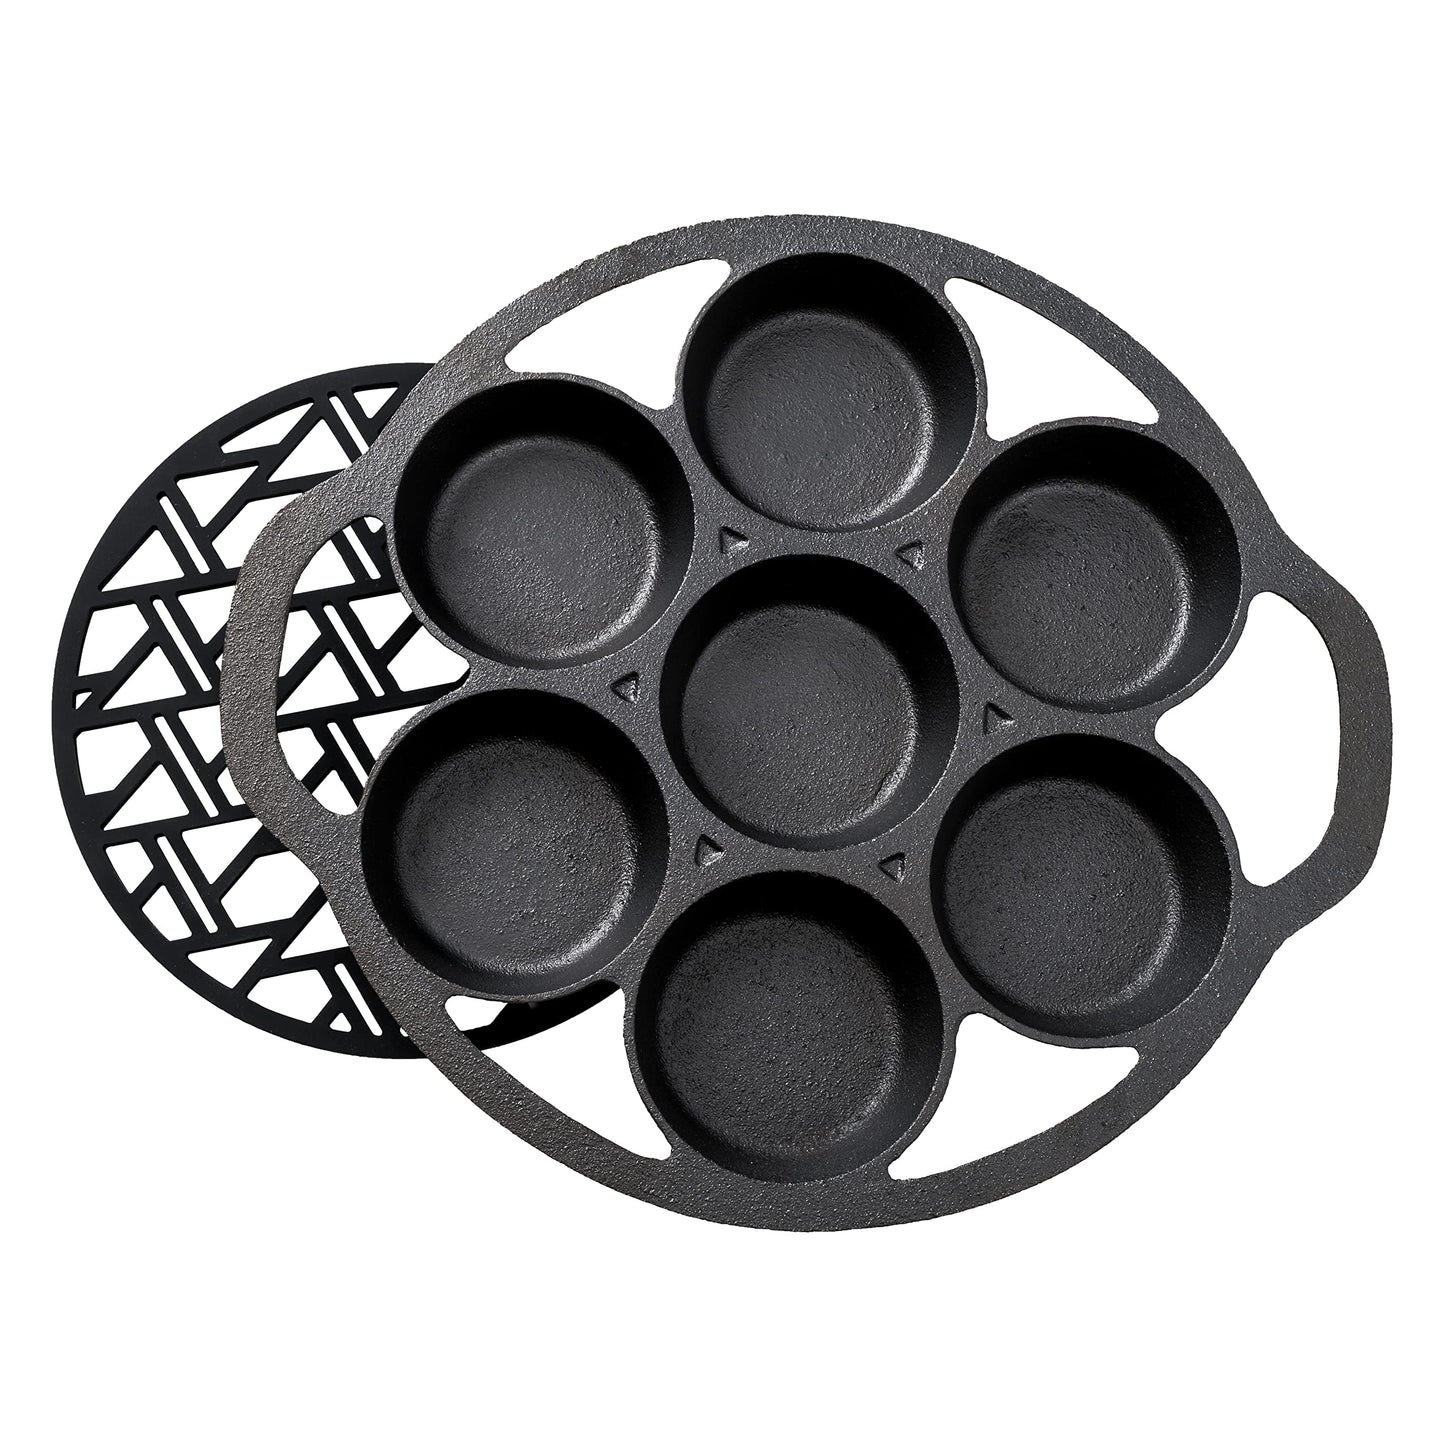 Biscuit Pan - Pre-Seasoned Cast Iron Skillet for Baking Biscuits, Muffins, Mini Cakes - with Silicone Trivet - by KUHA